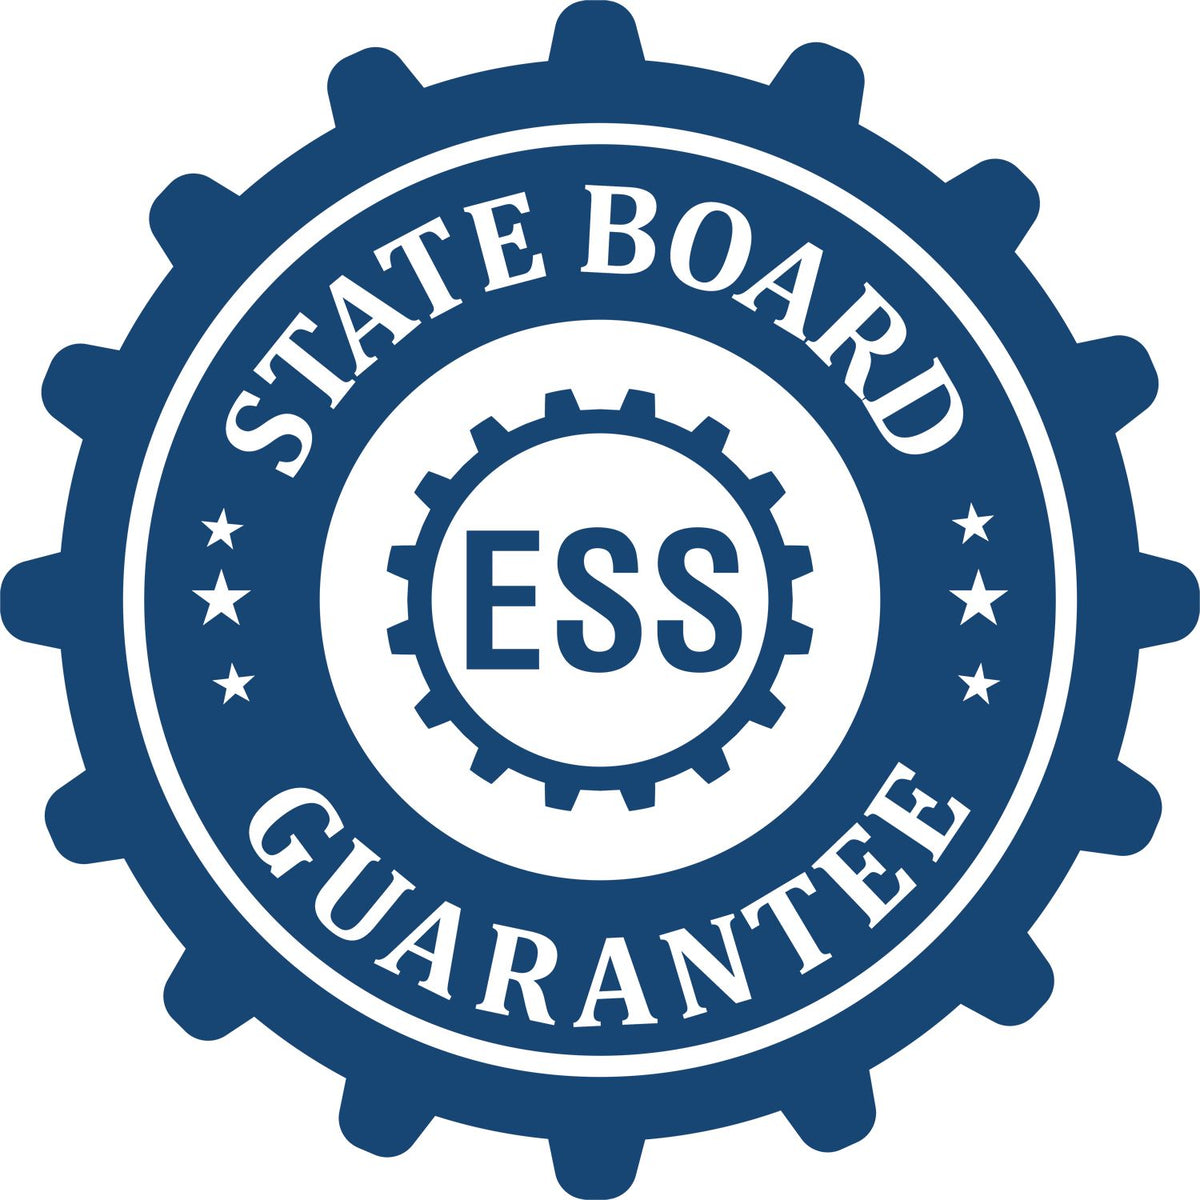 An emblem in a gear shape illustrating a state board guarantee for the Digital Ohio Landscape Architect Stamp product.